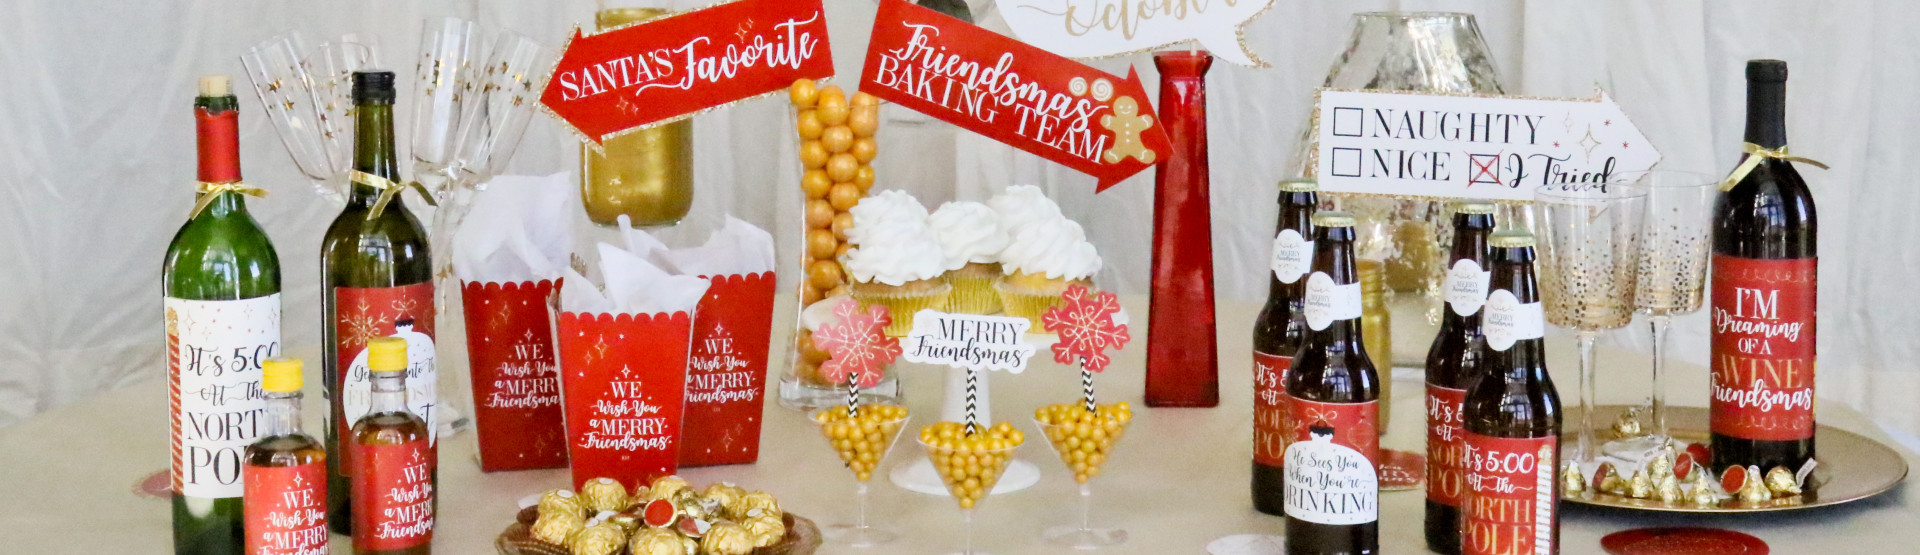 Friends Christmas Party Ideas
 Red and Gold Friendsmas Friends Christmas Theme